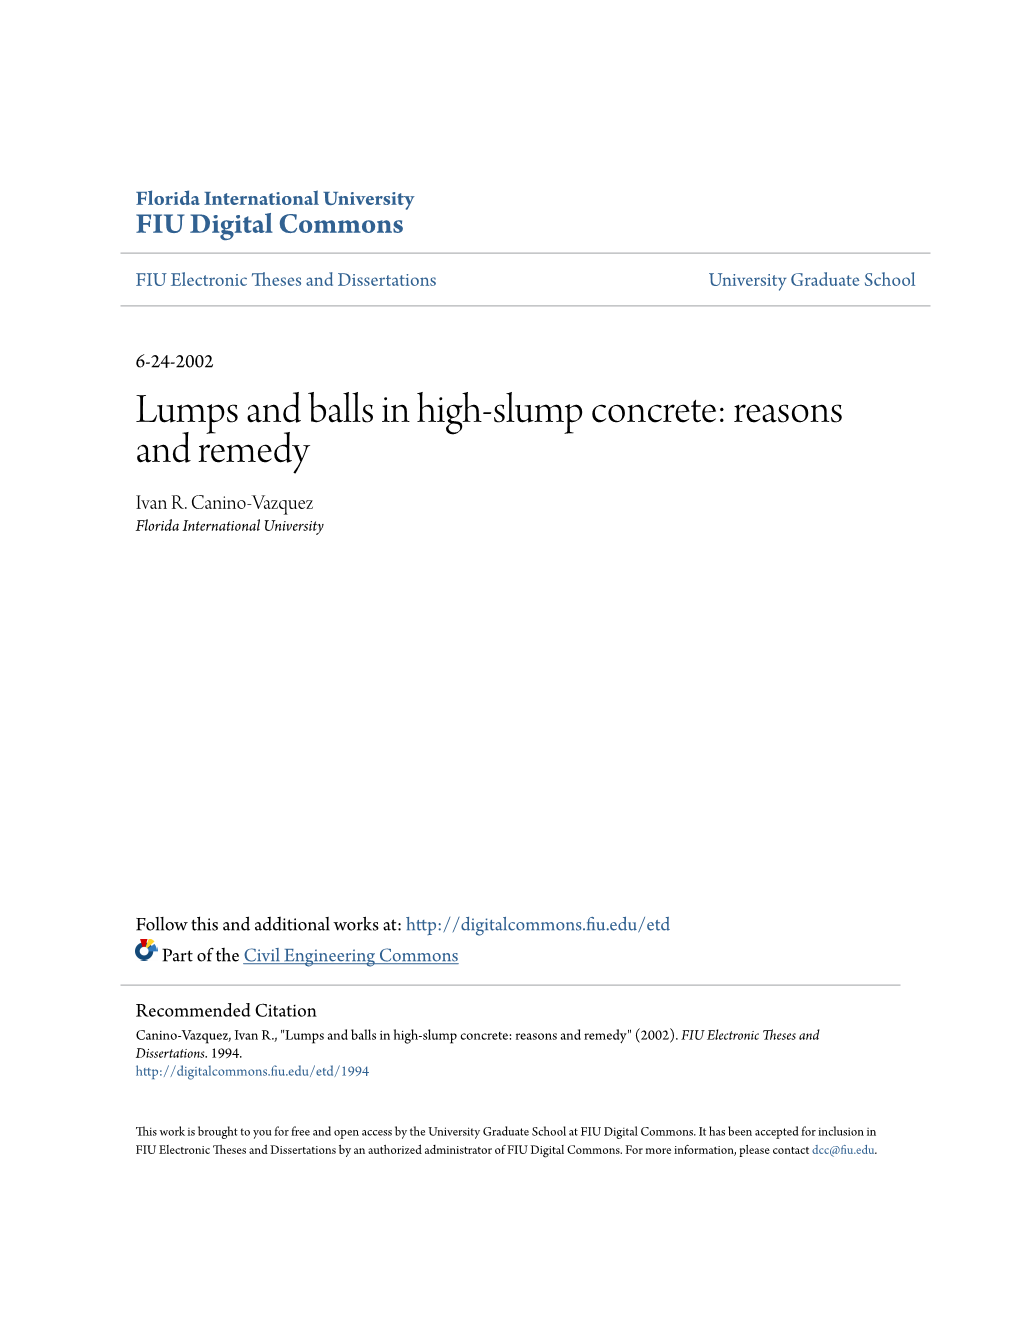 Lumps and Balls in High-Slump Concrete: Reasons and Remedy Ivan R